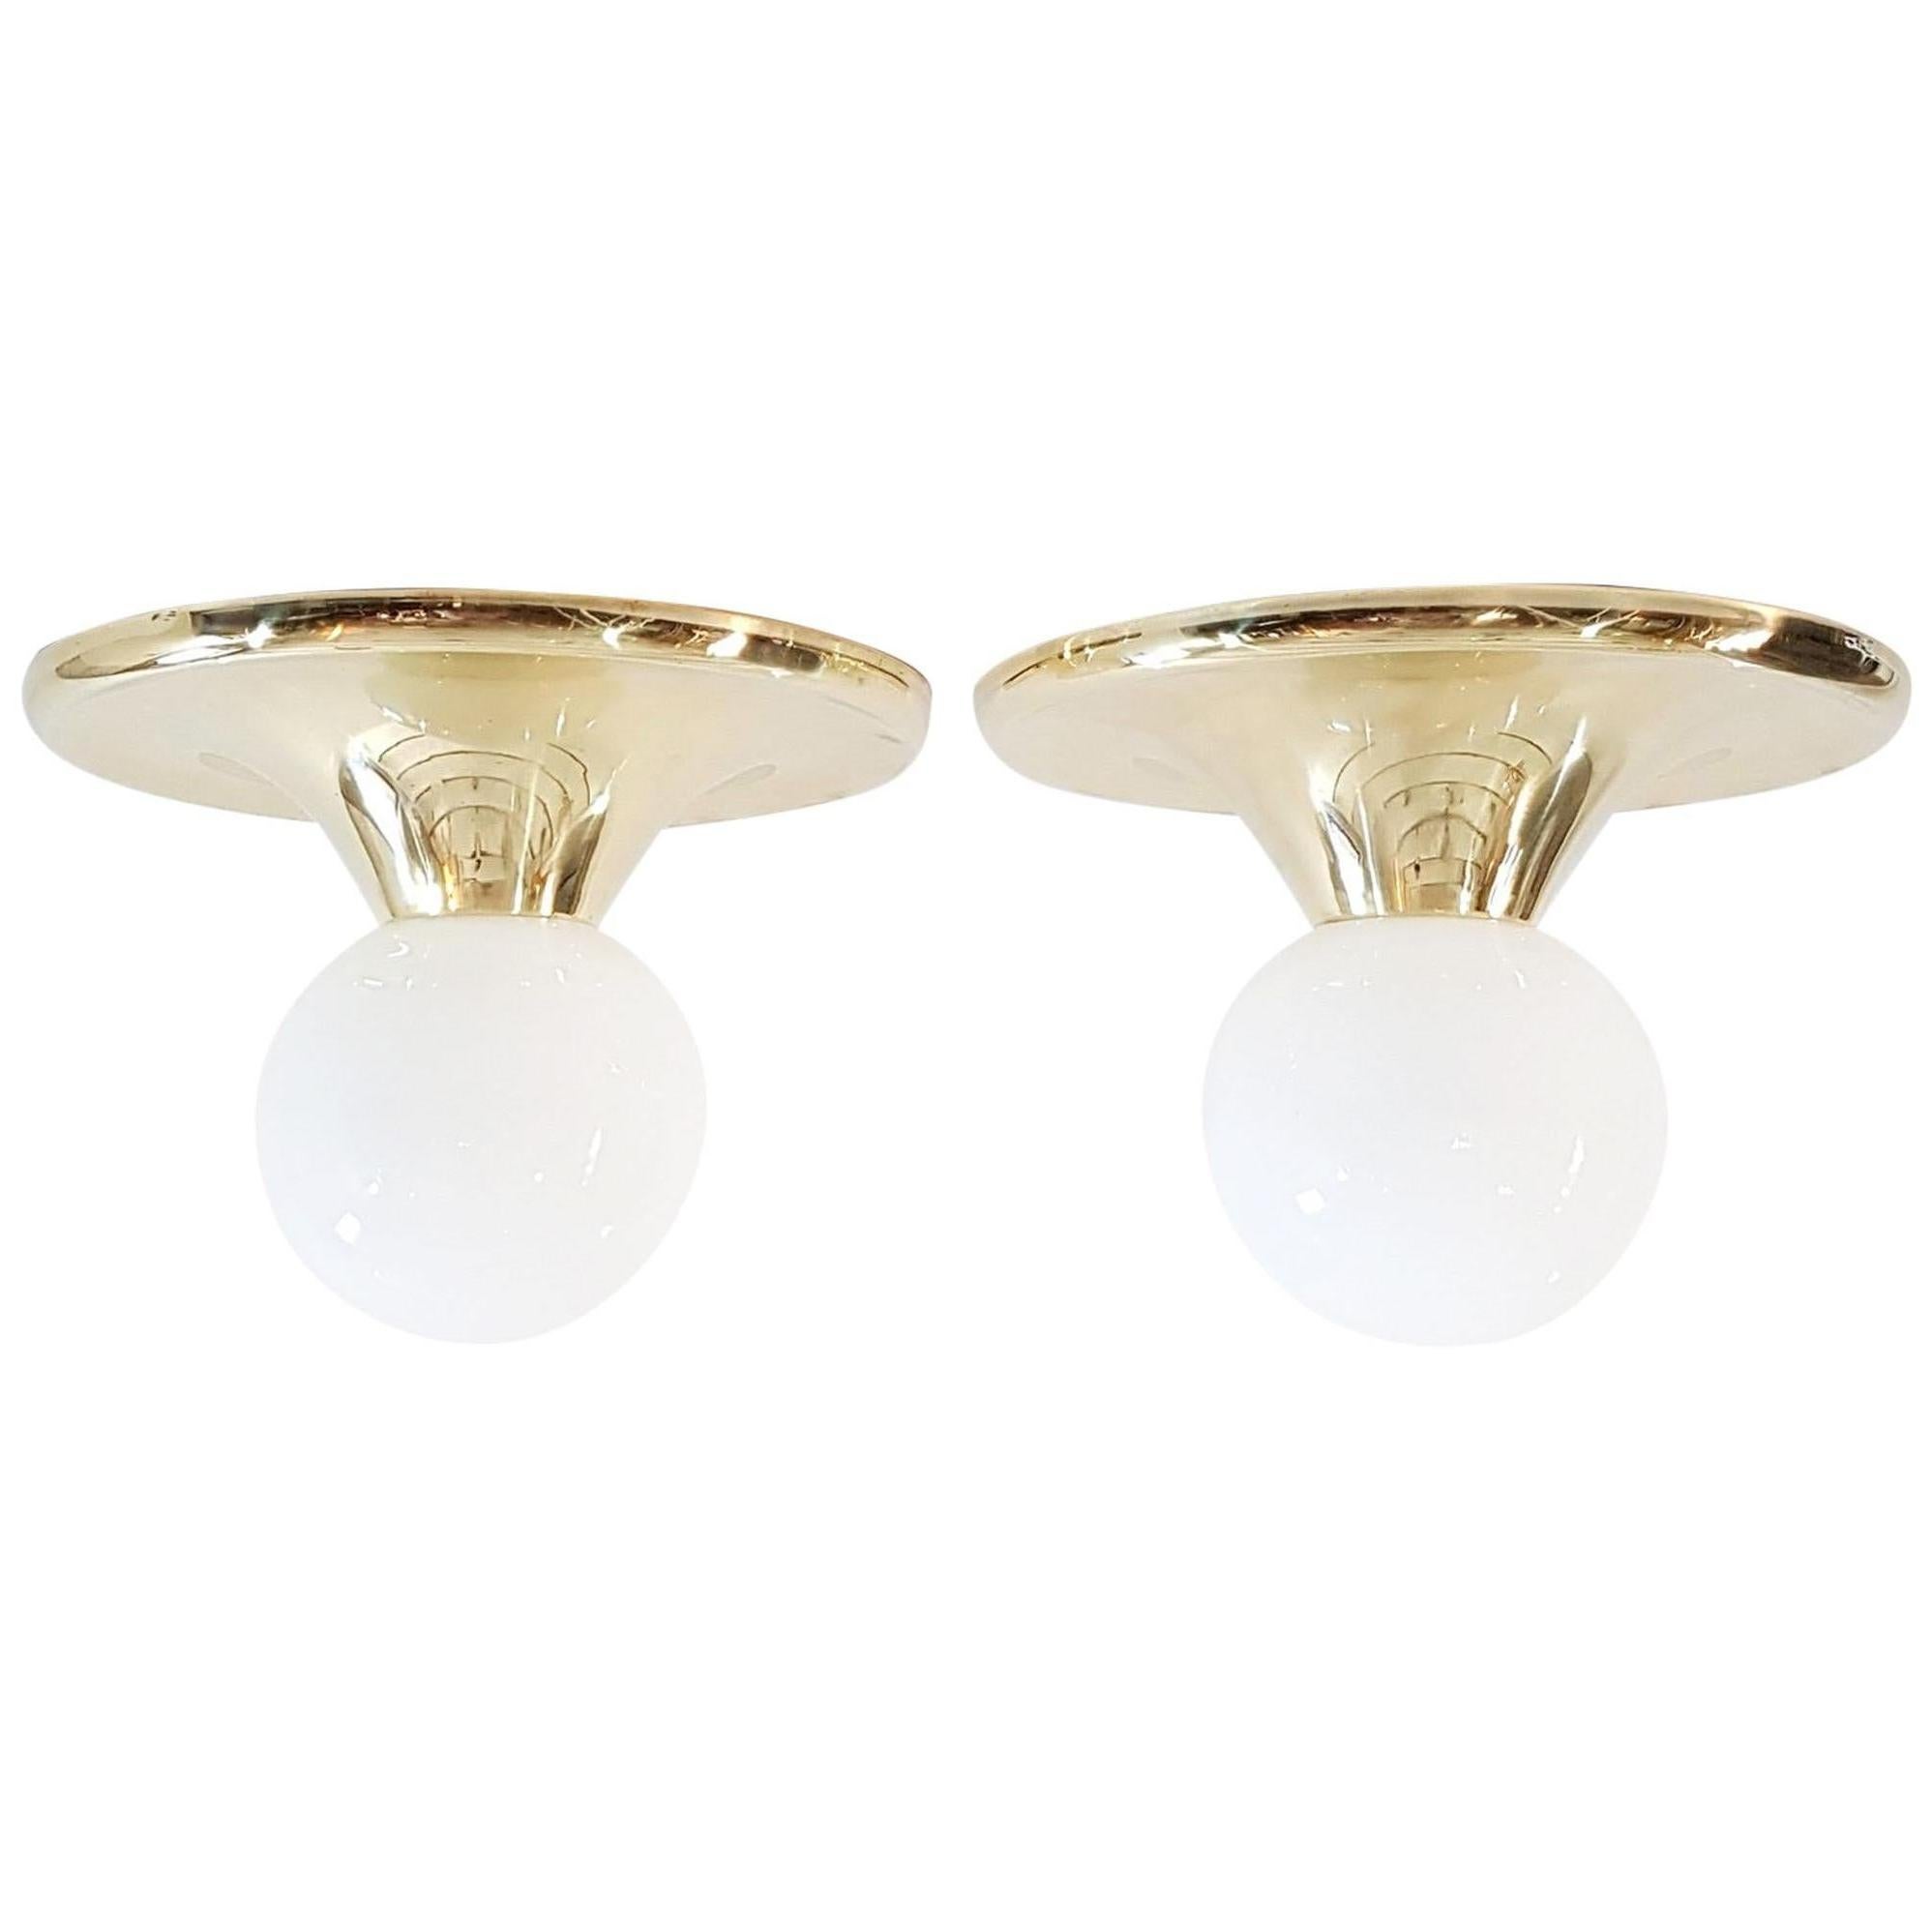 Pair of "Light Ball" Lamps by Castiglioni for Flos, Italy, 1965 For Sale